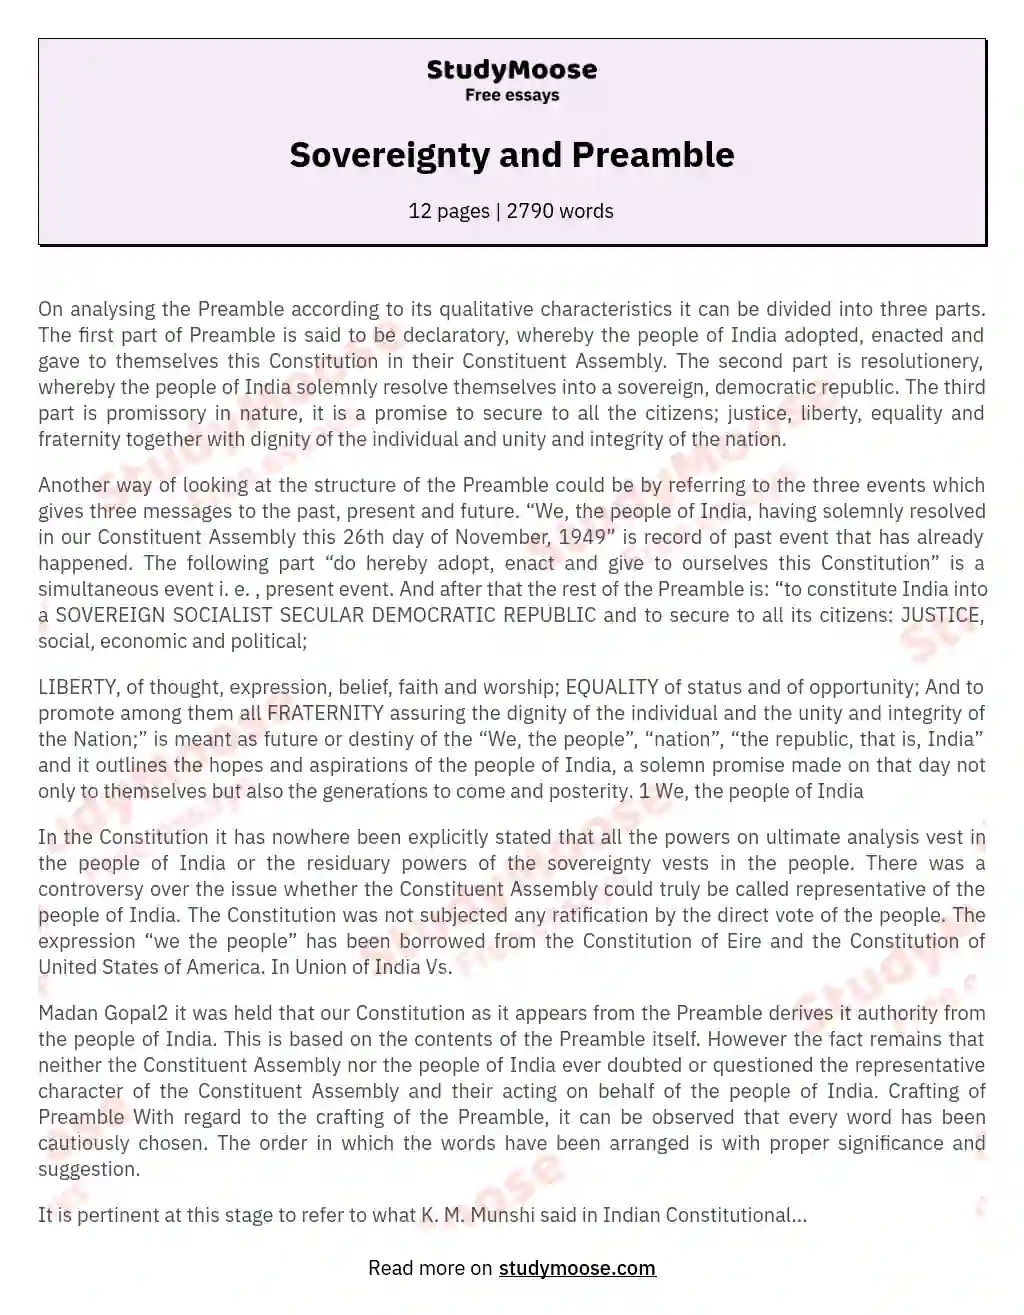 Sovereignty and Preamble essay